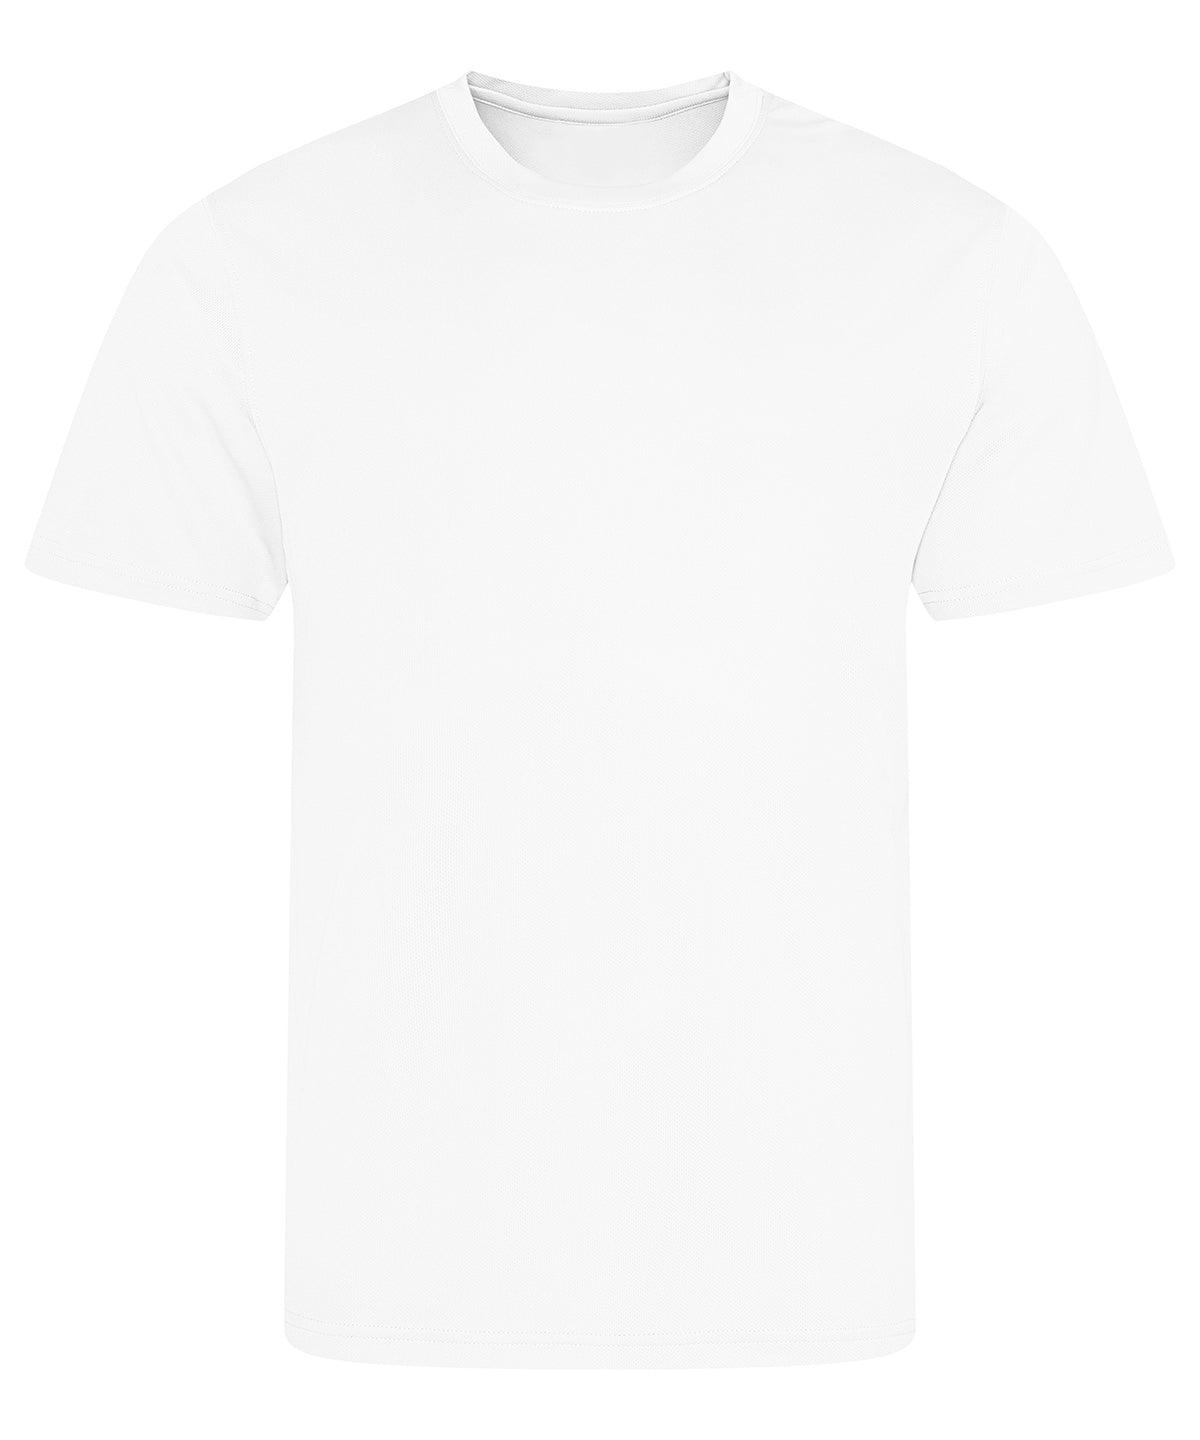 Personalised T-Shirts - White AWDis Just Cool Recycled cool T